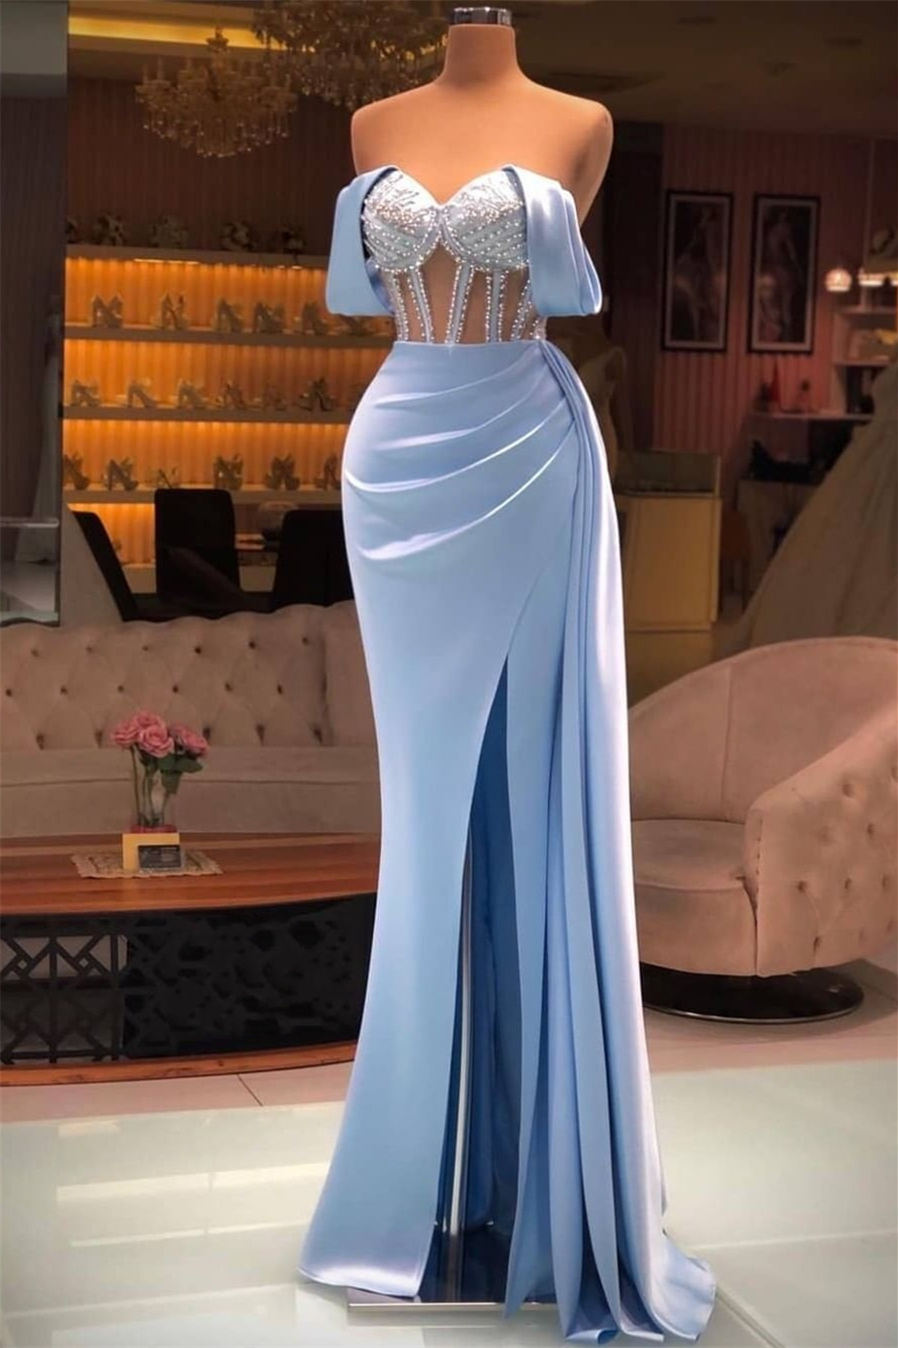 Budget Baby Blue Off-the-Shoulder Evening Gowns Split Long With Beads - lulusllly